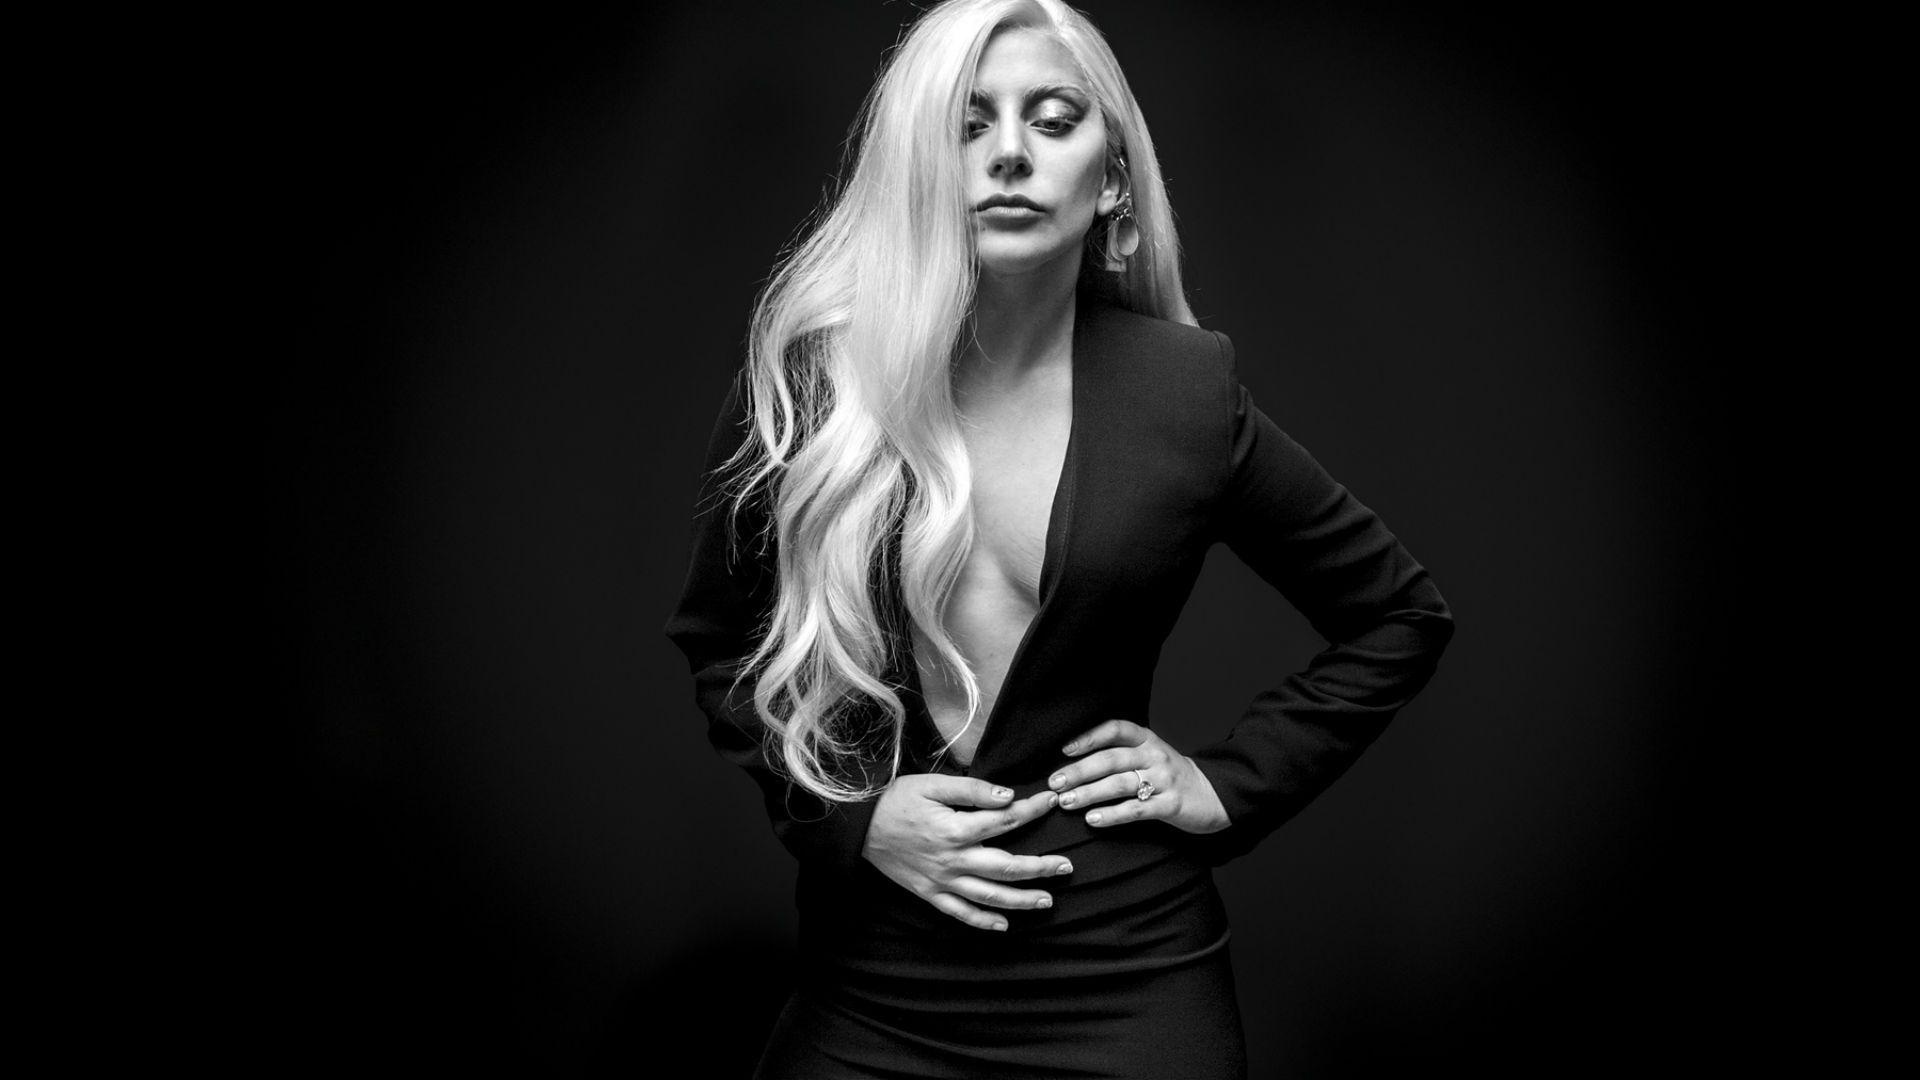 Lady Gaga Live Wallpaper Iphone The Best Hd Wallpaper